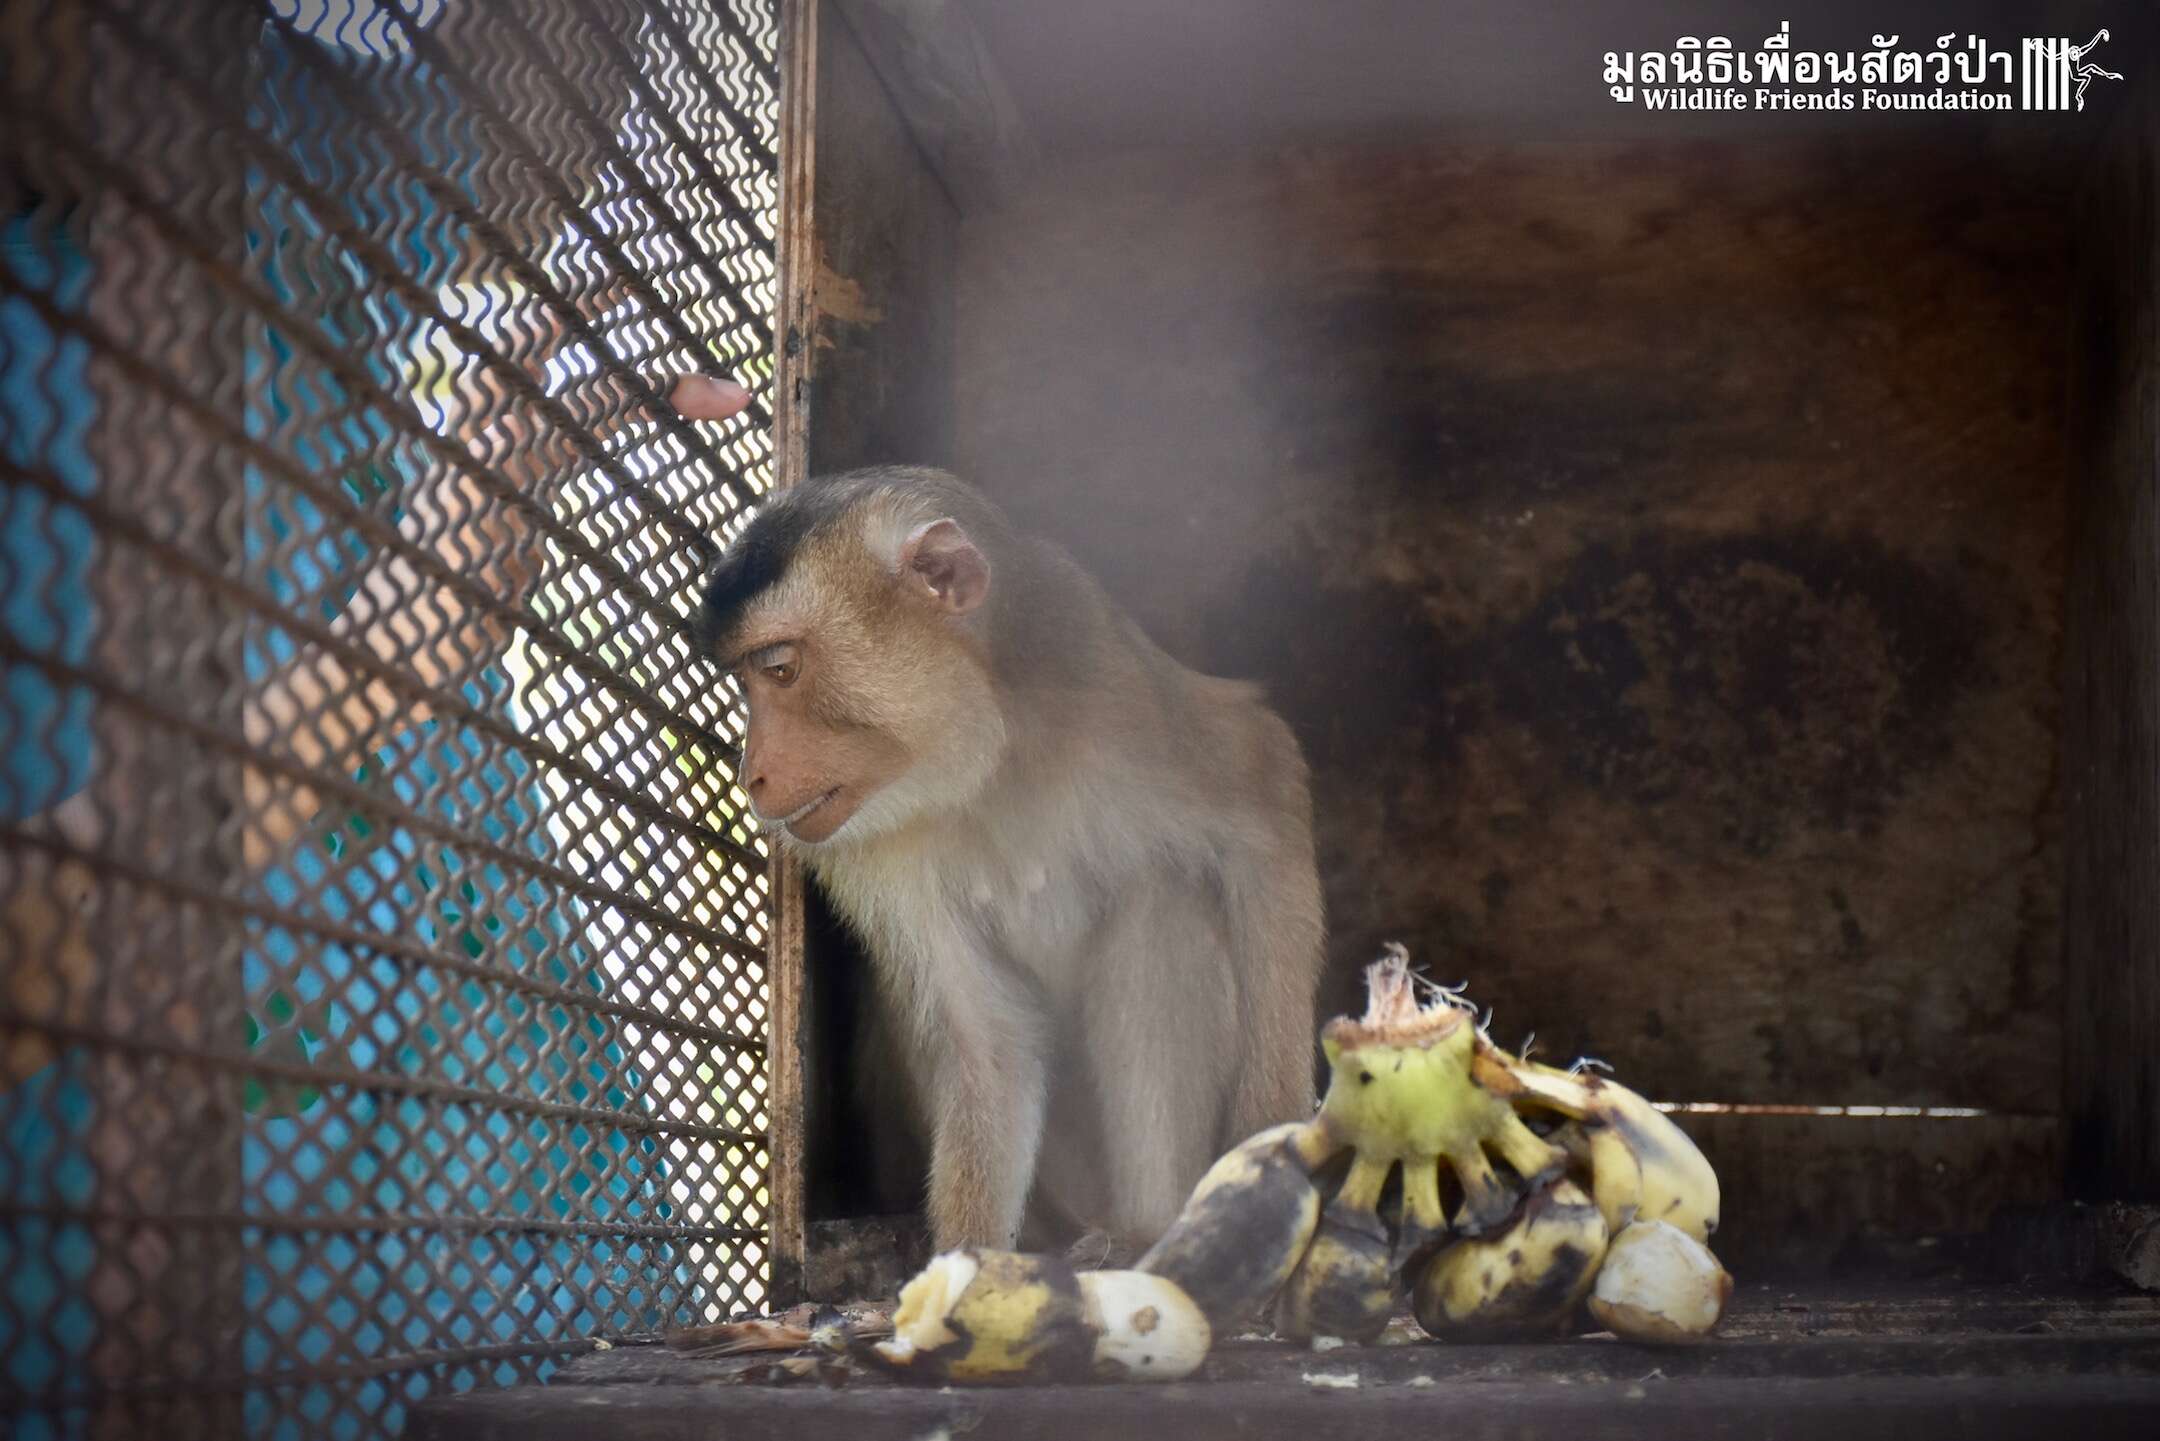 Pet macaque in Thailand before rescue